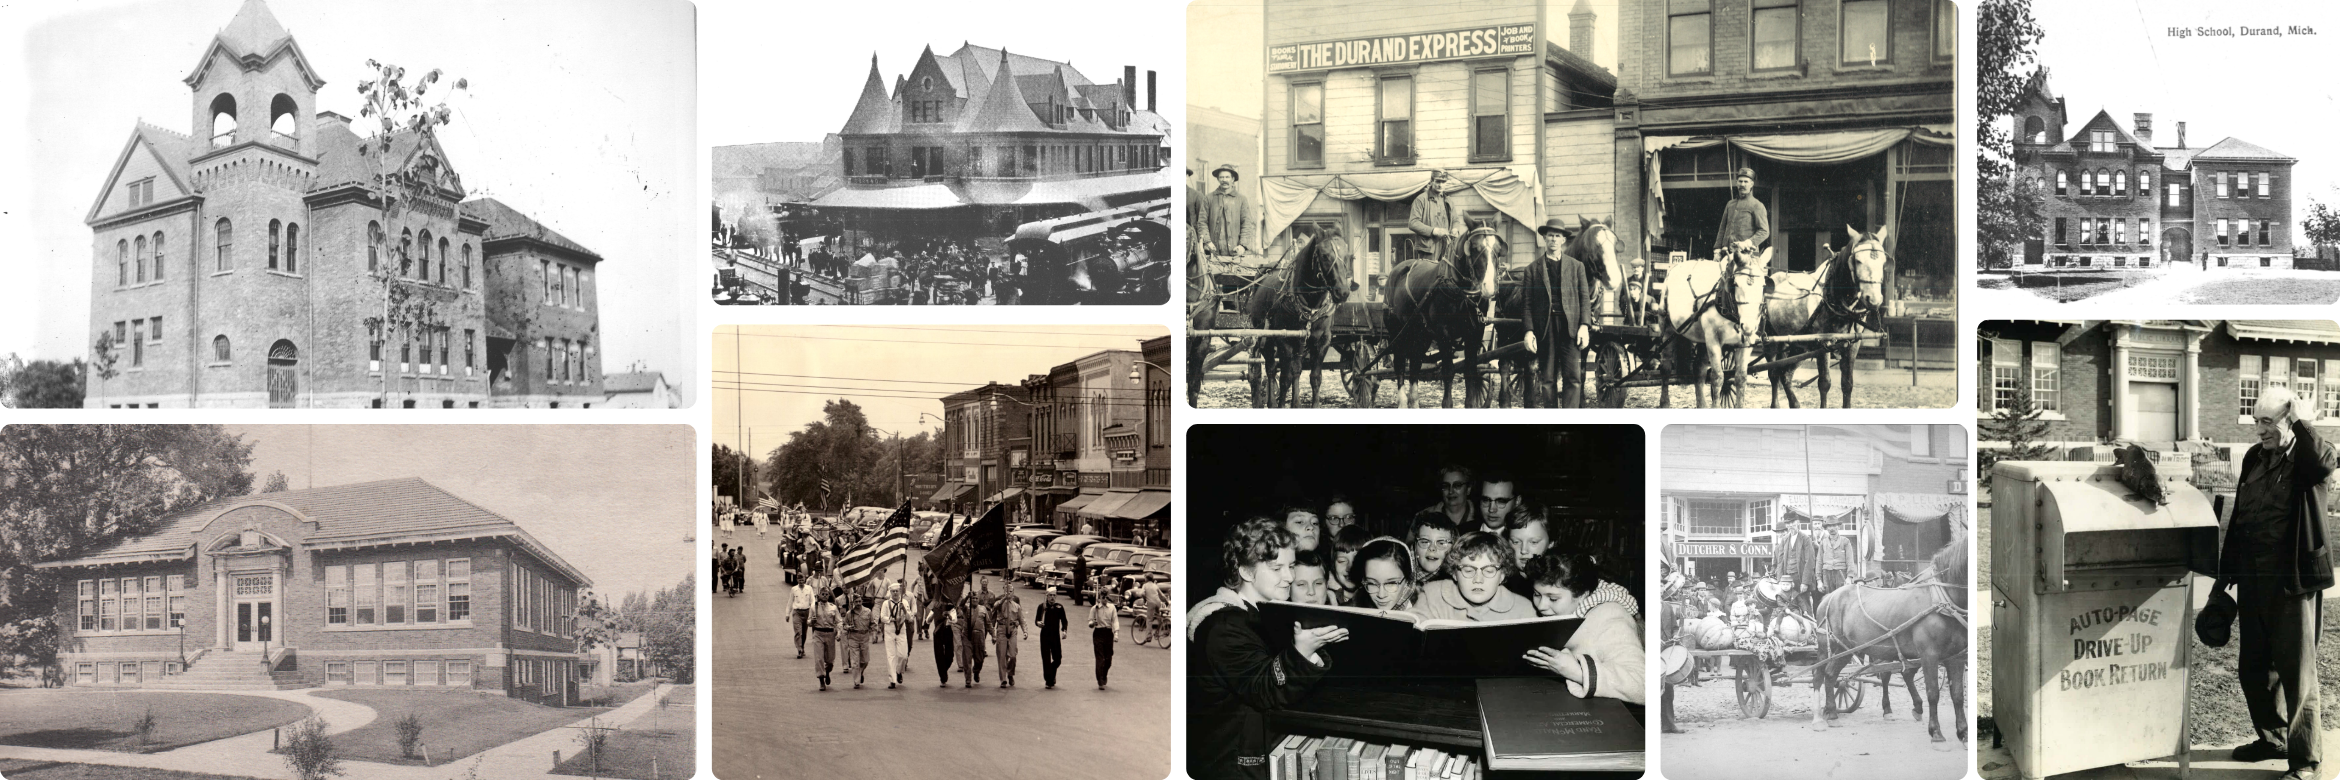 Local History collage with photos of different historical buildings and areas